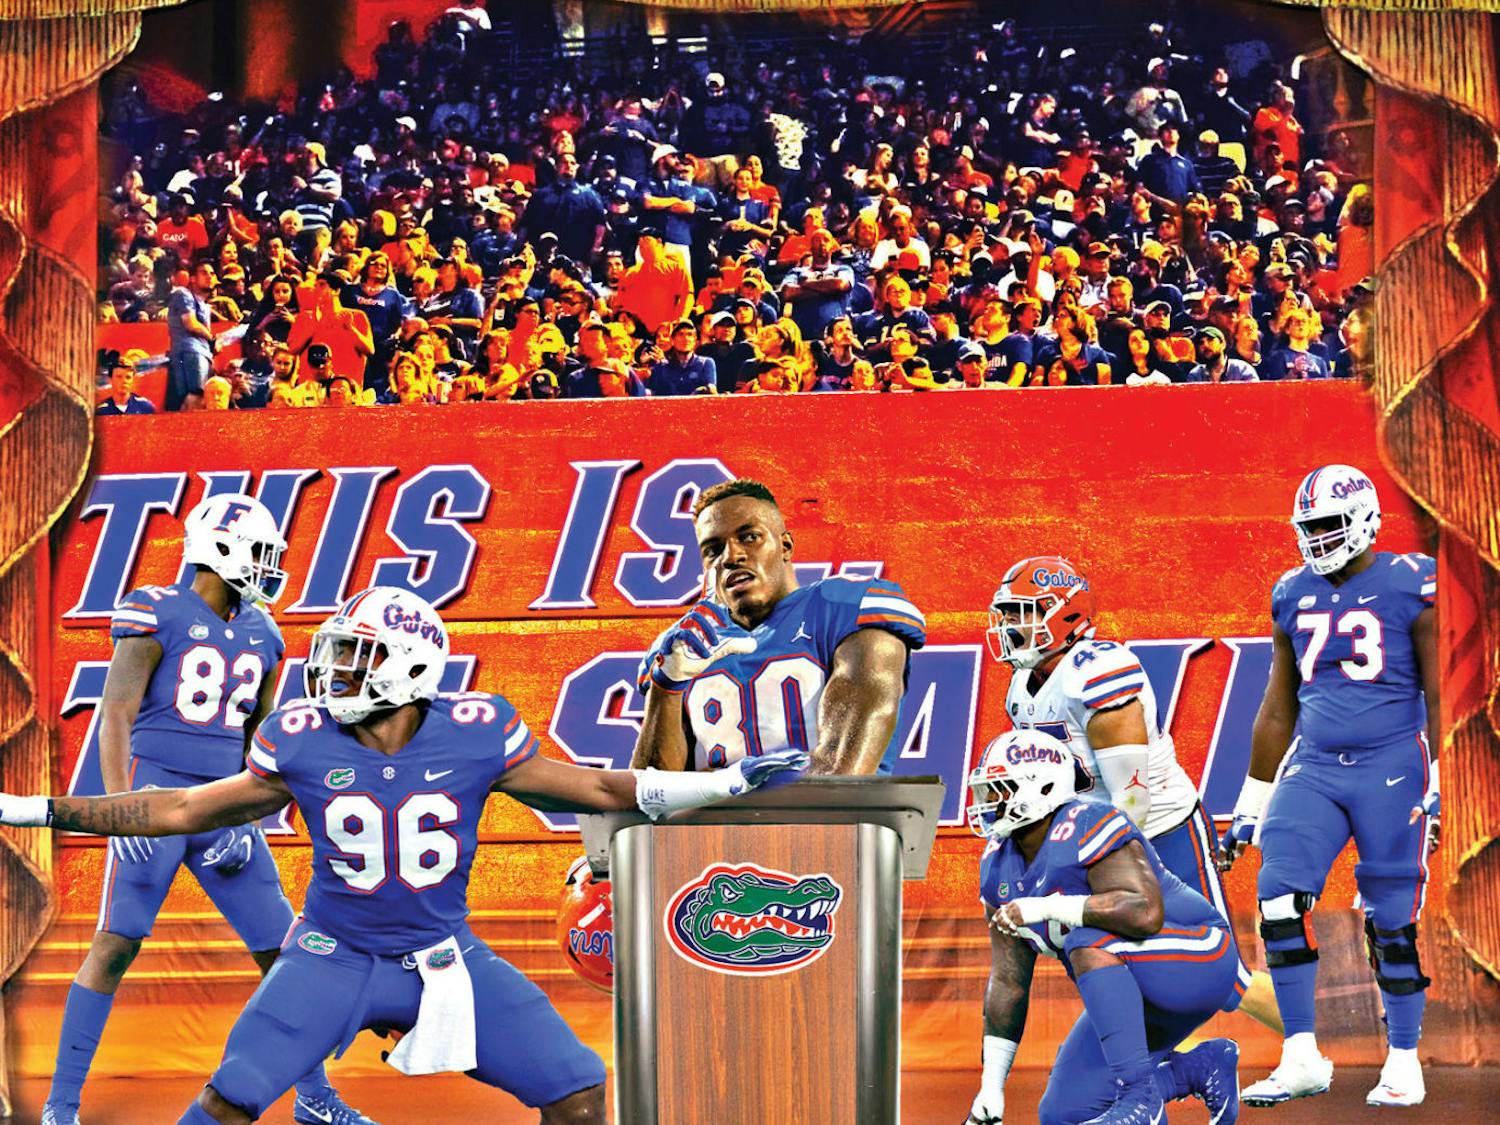 Florida football will host its Senior Day when it takes on Idaho at noon on Saturday.